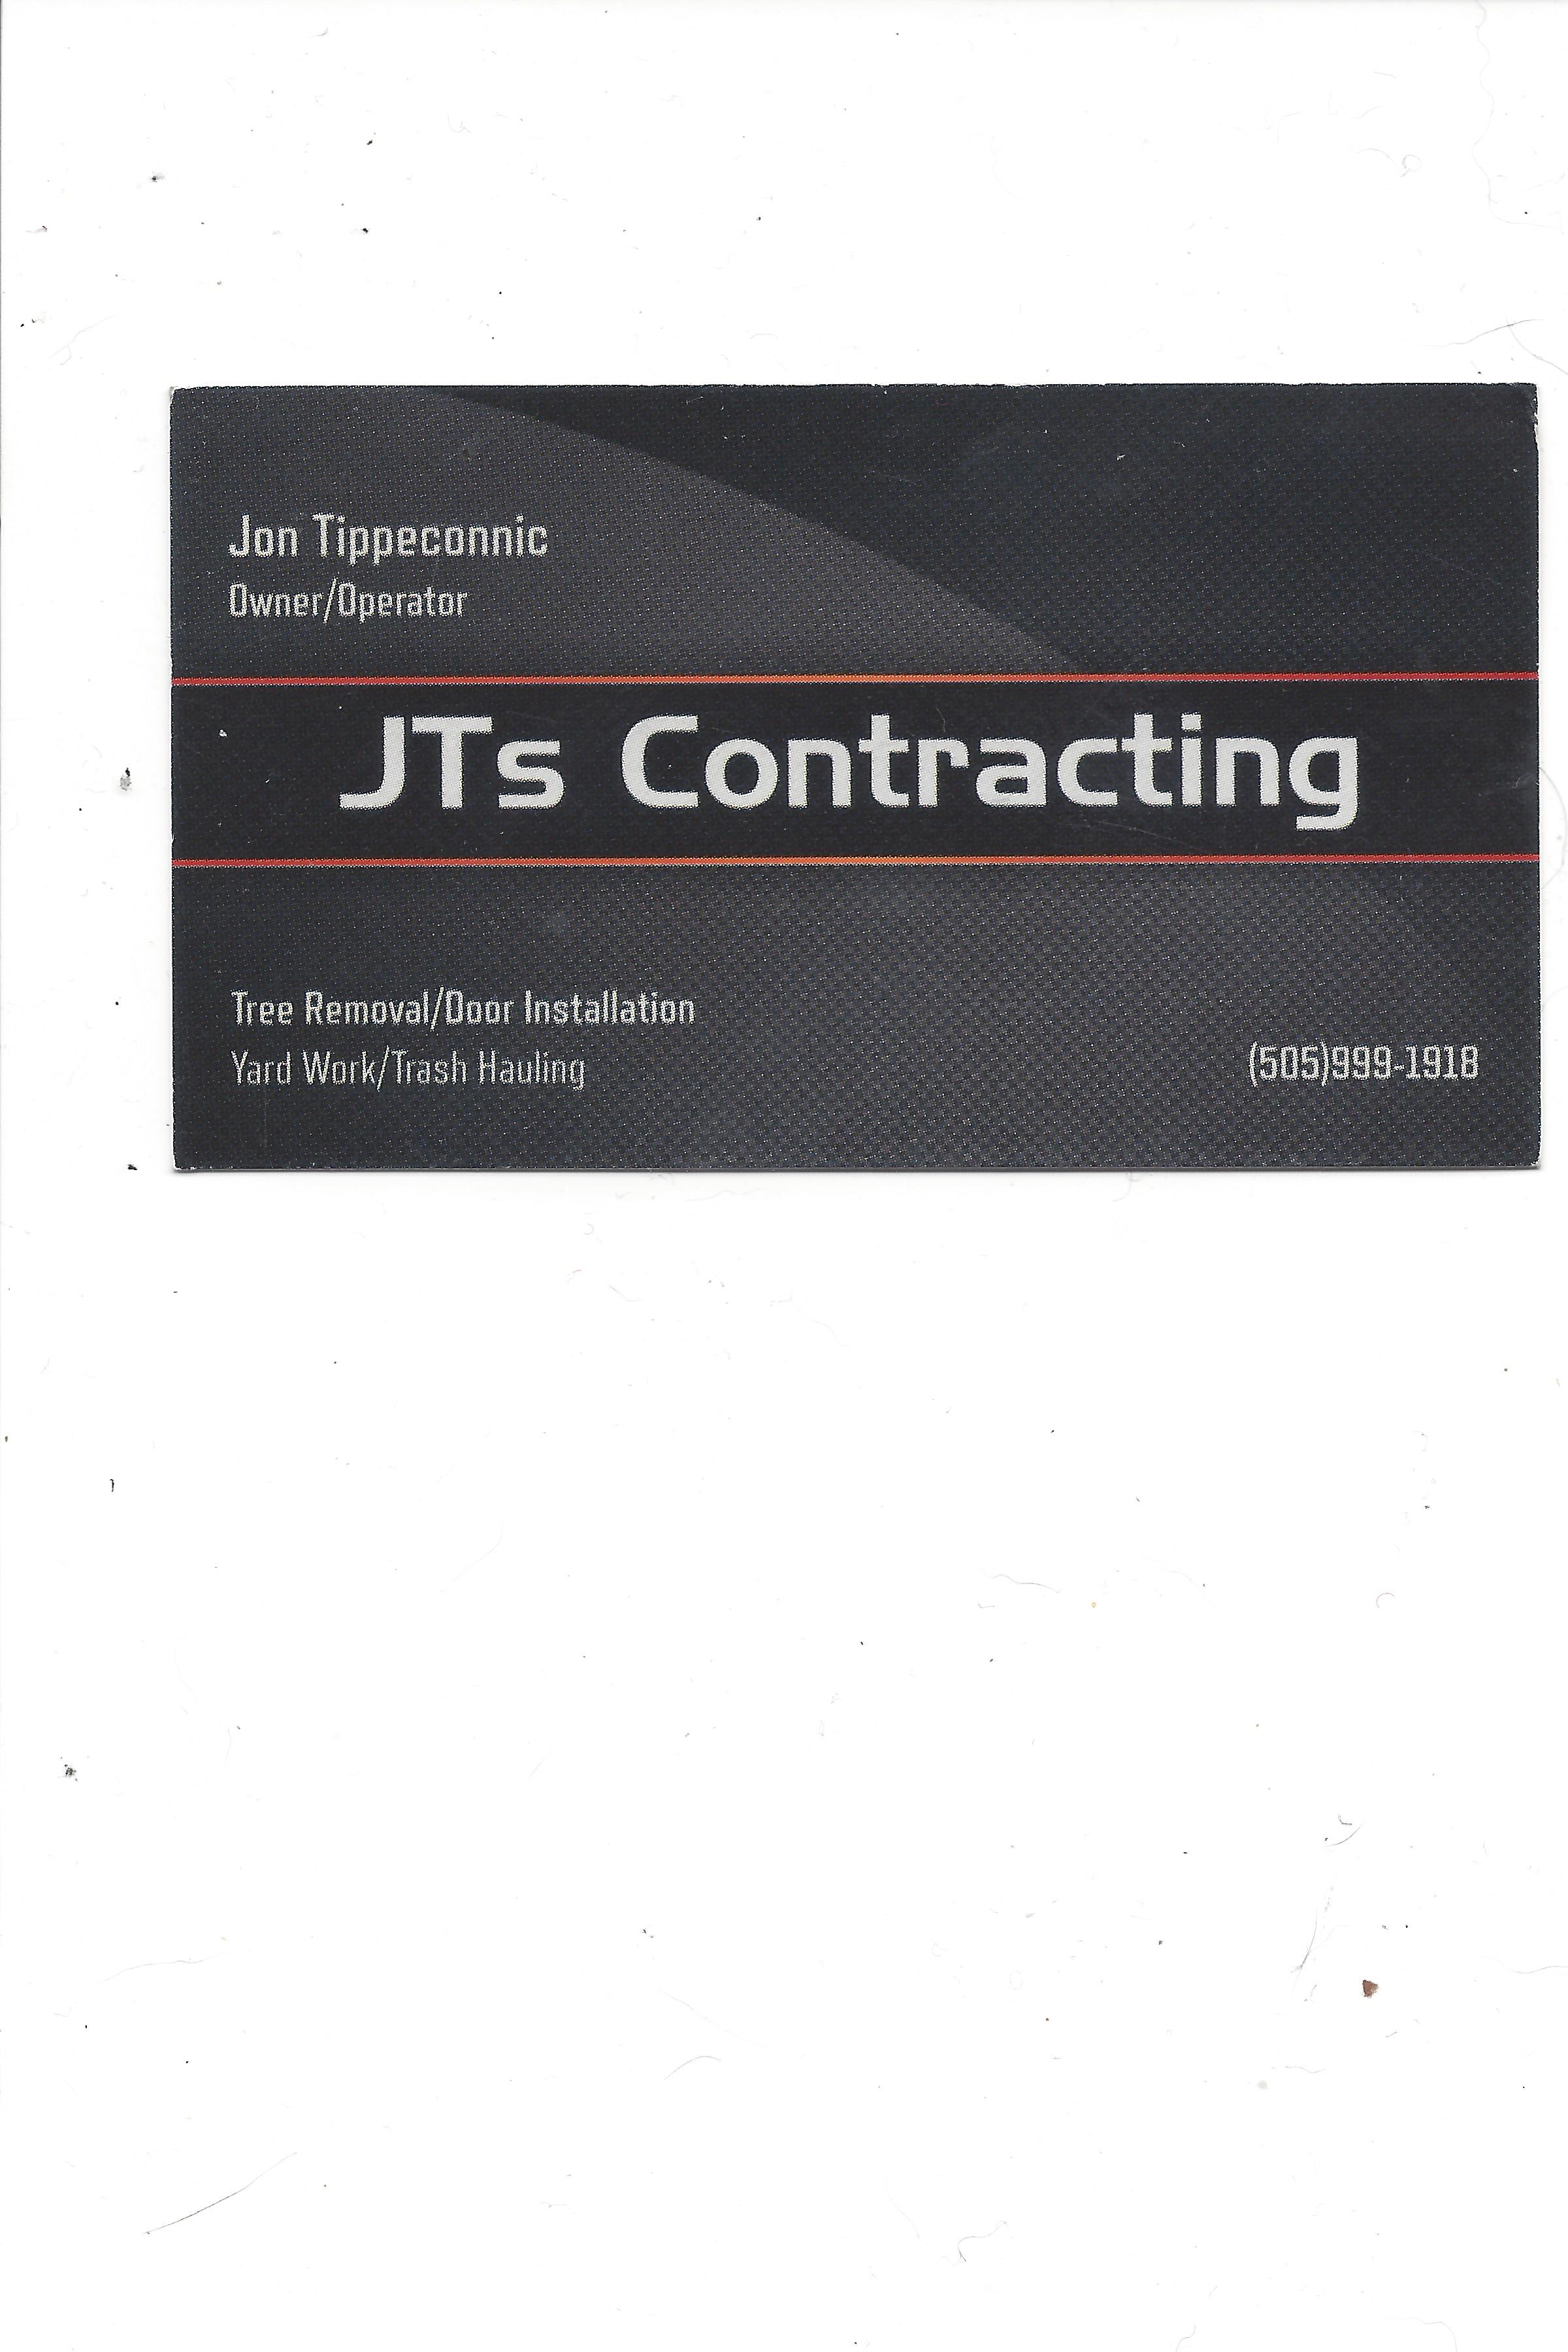 JT's Contracting Logo